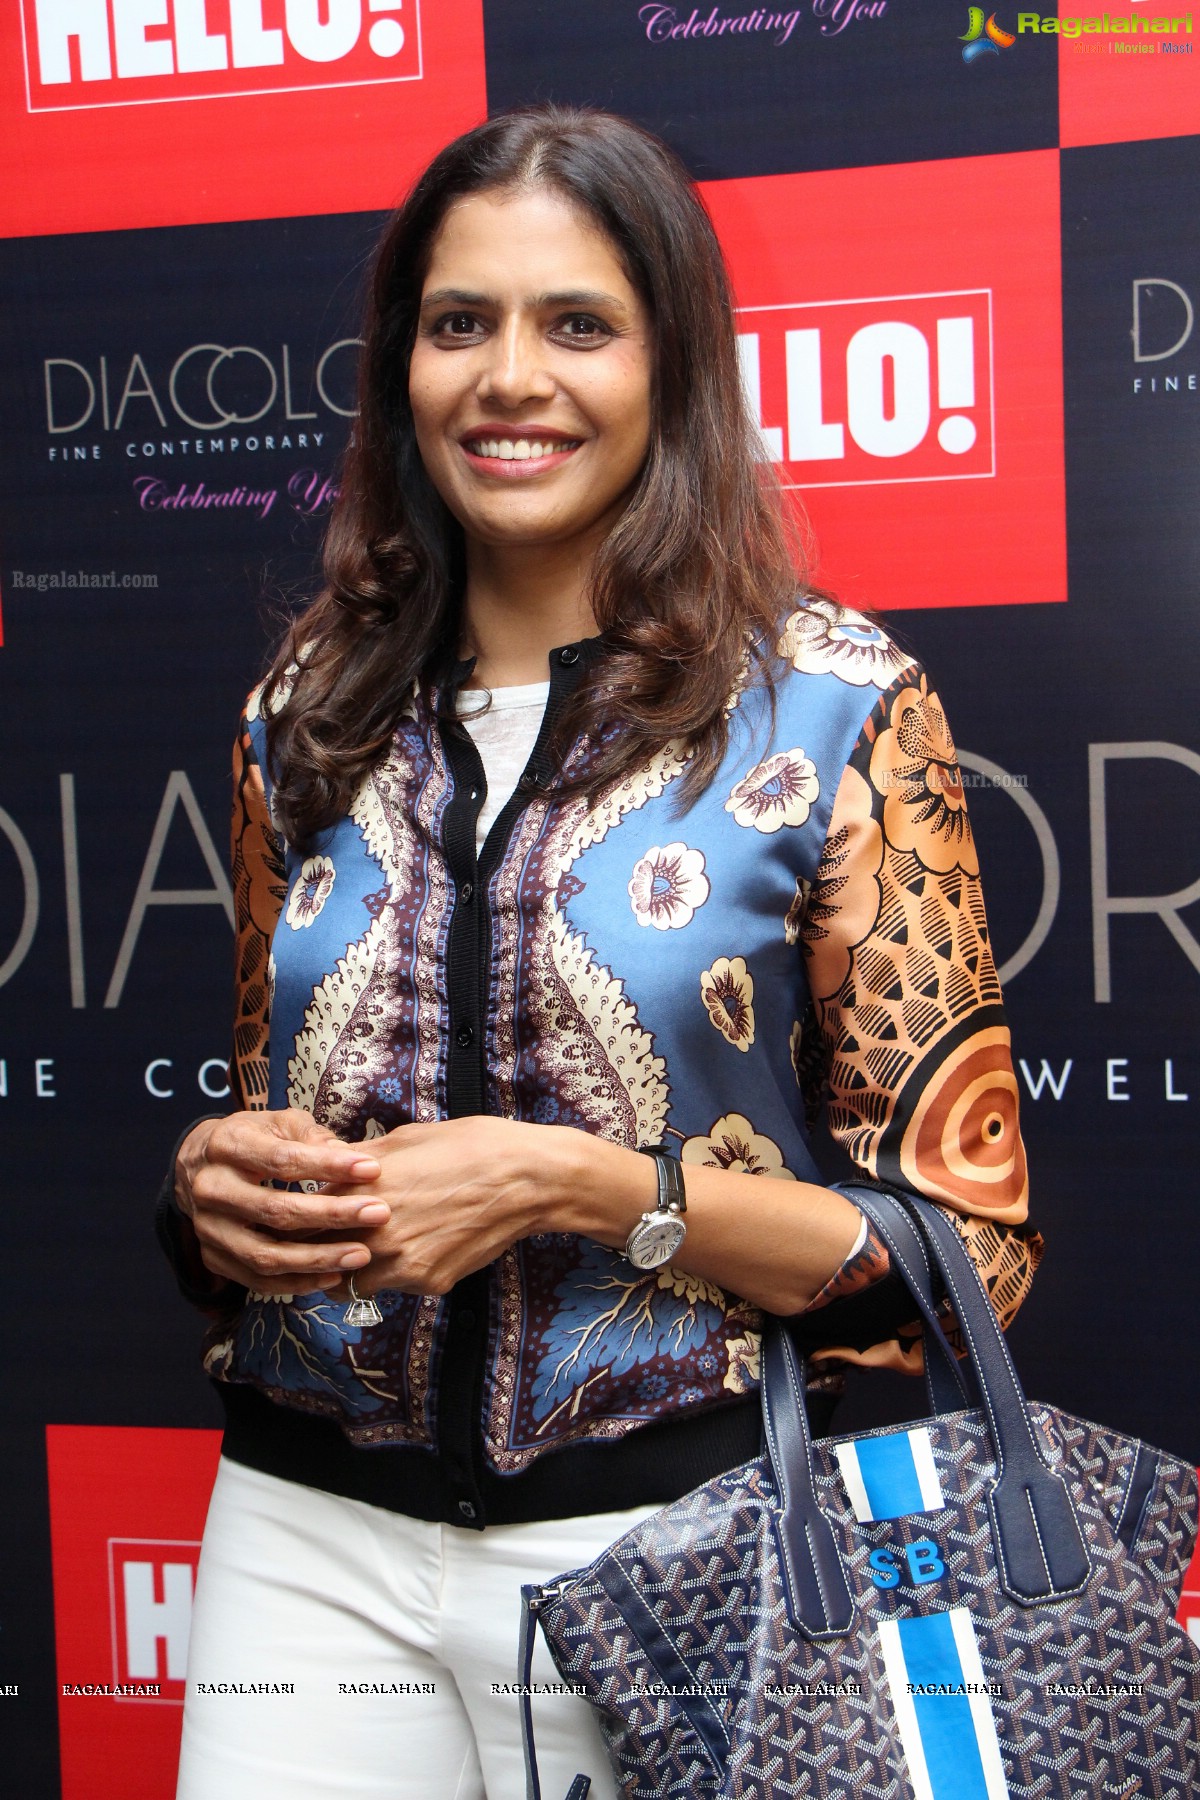 Diacolor Rare Jewels Showcase by Pinky Reddy and Ruchika Mehta at Park Hyatt